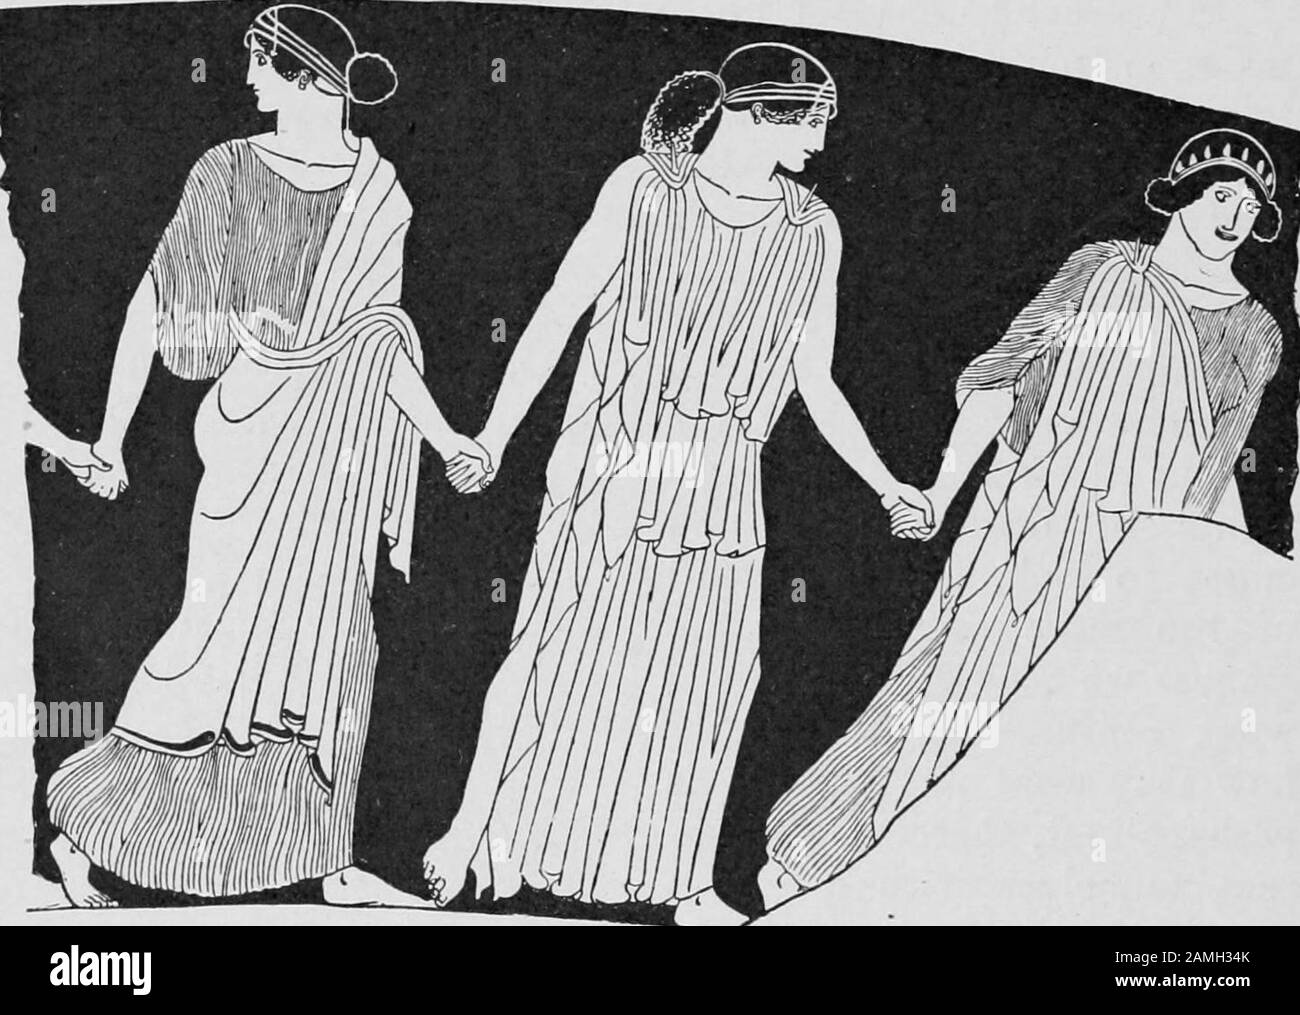 Illustration of ancient Athenian women in tunics, taken from the book 'Life in Ancient Athens' by author TG Tucker, published by Macmillan and Co, 1907. Courtesy Internet Archive. () Stock Photo